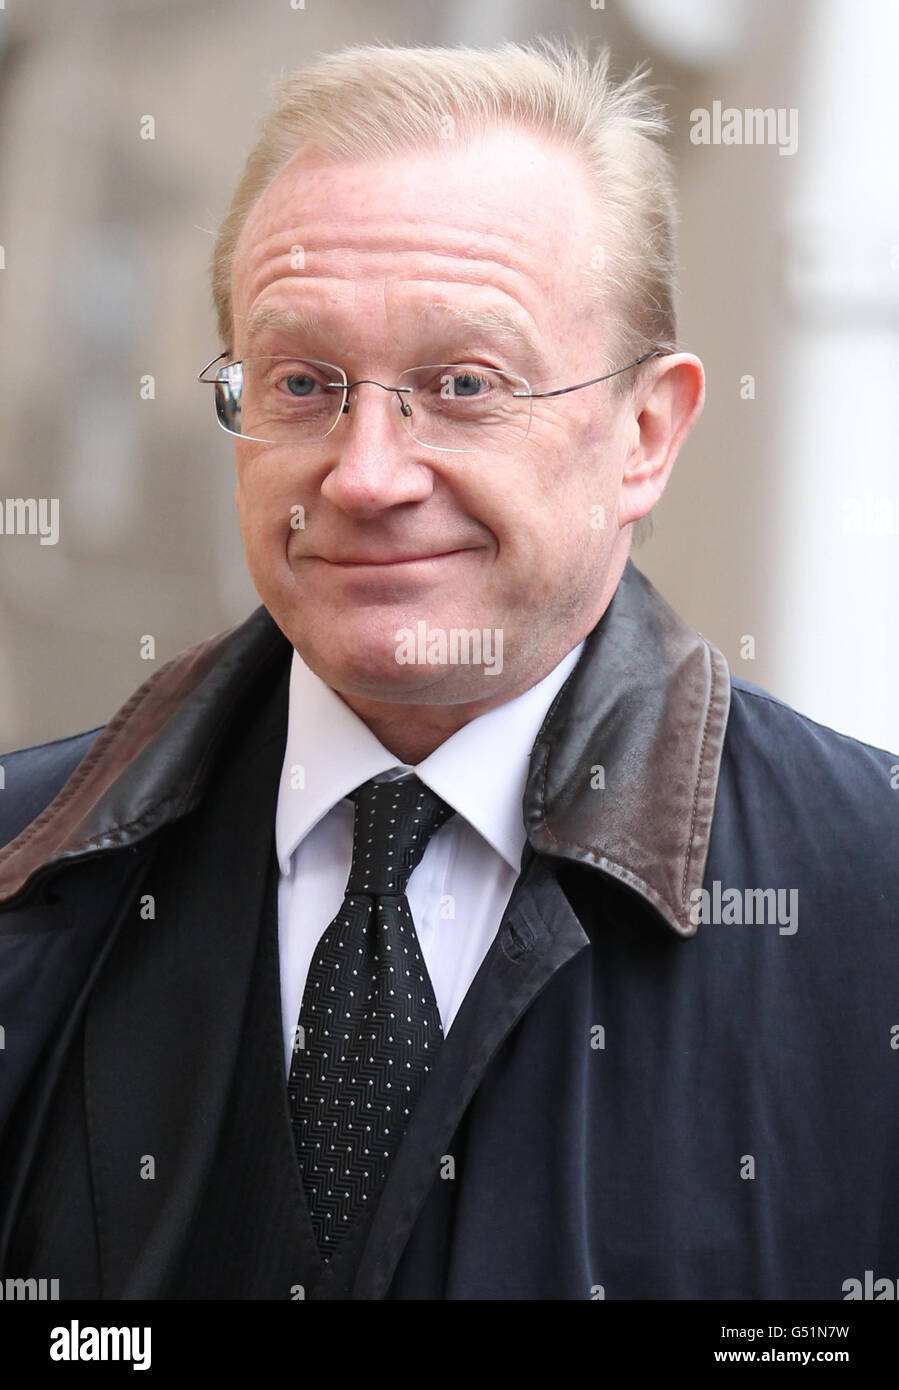 Prosecution QC Alex Prentice at Edinburgh High Court after David Gilroy was found guilty of of carrying out the killing of Suzanne by 'unknown means' on May 4 2010. PRESS ASSOCIATION Photo. Picture date: Thursday March 15, 2012. Book-keeper Suzanne, 38, vanished without trace nearly two years ago after making a routine journey to work in Edinburgh city centre. See PA story COURTS Pilley. Photo credit should read: Andrew Milligan/PA Wire Stock Photo